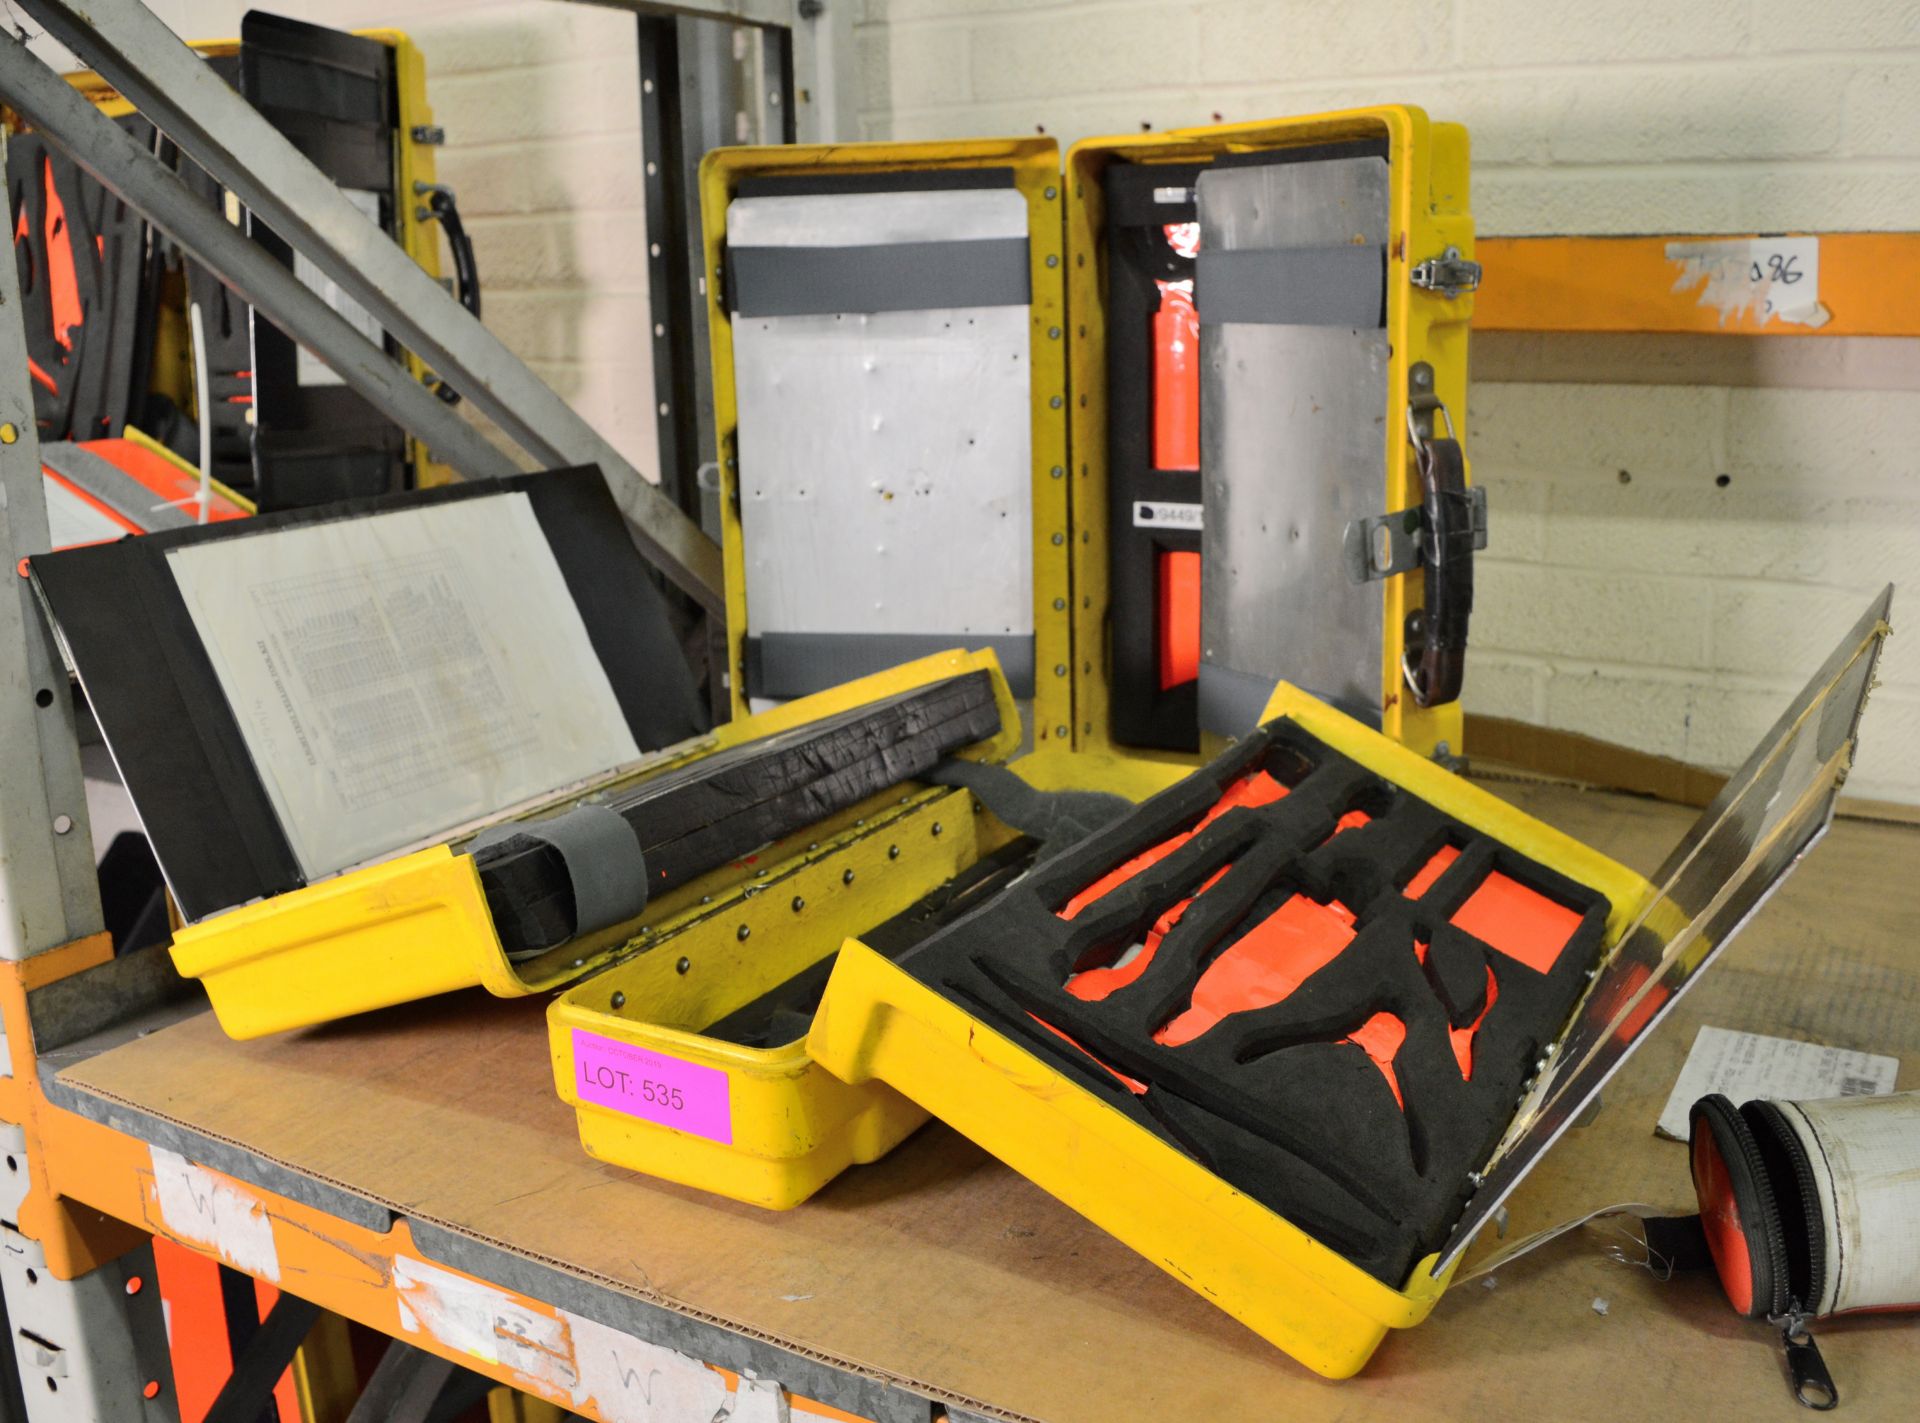 2x Tool Boxes Portable Yellow - Empty - Image 2 of 2